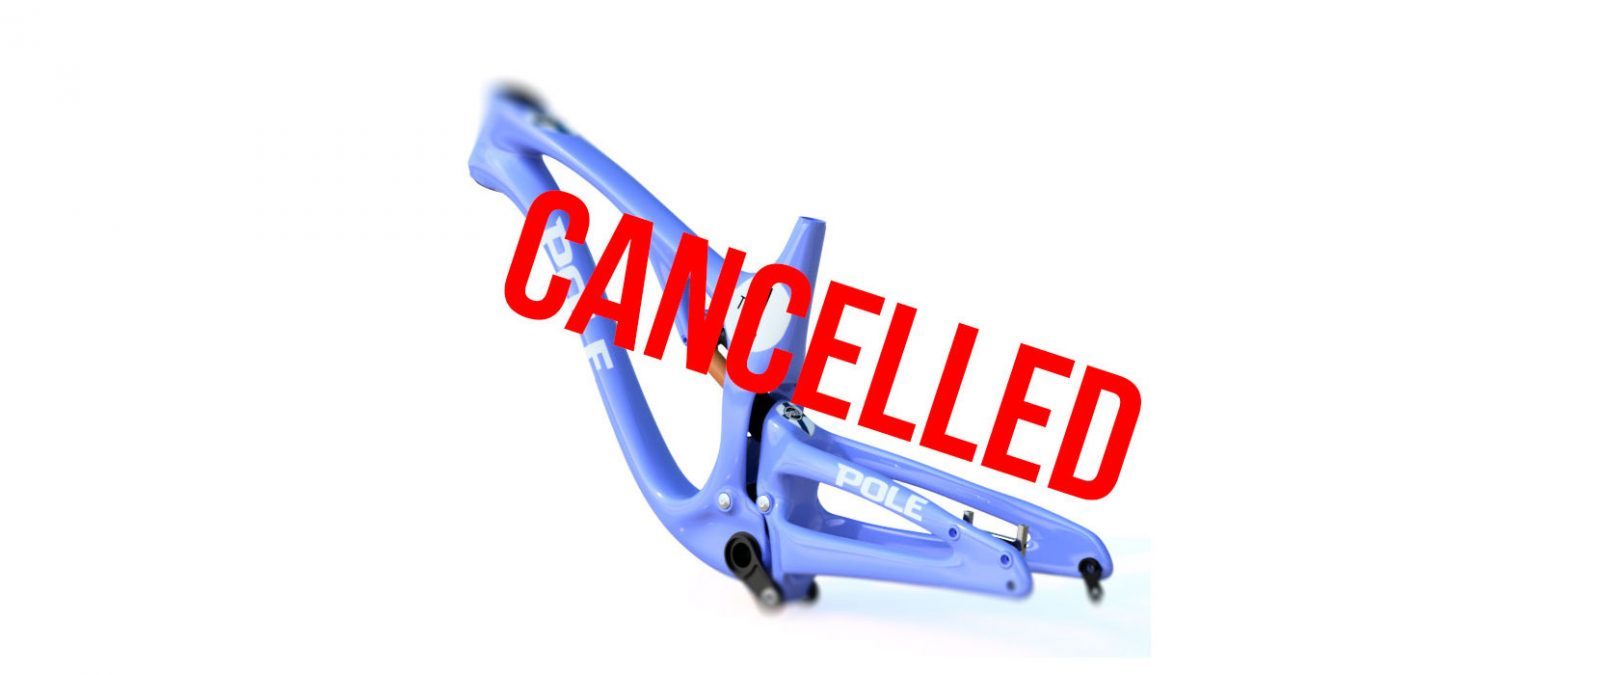 Polebicycles-cancelled-carbon-project-copia-1600x675.jpg